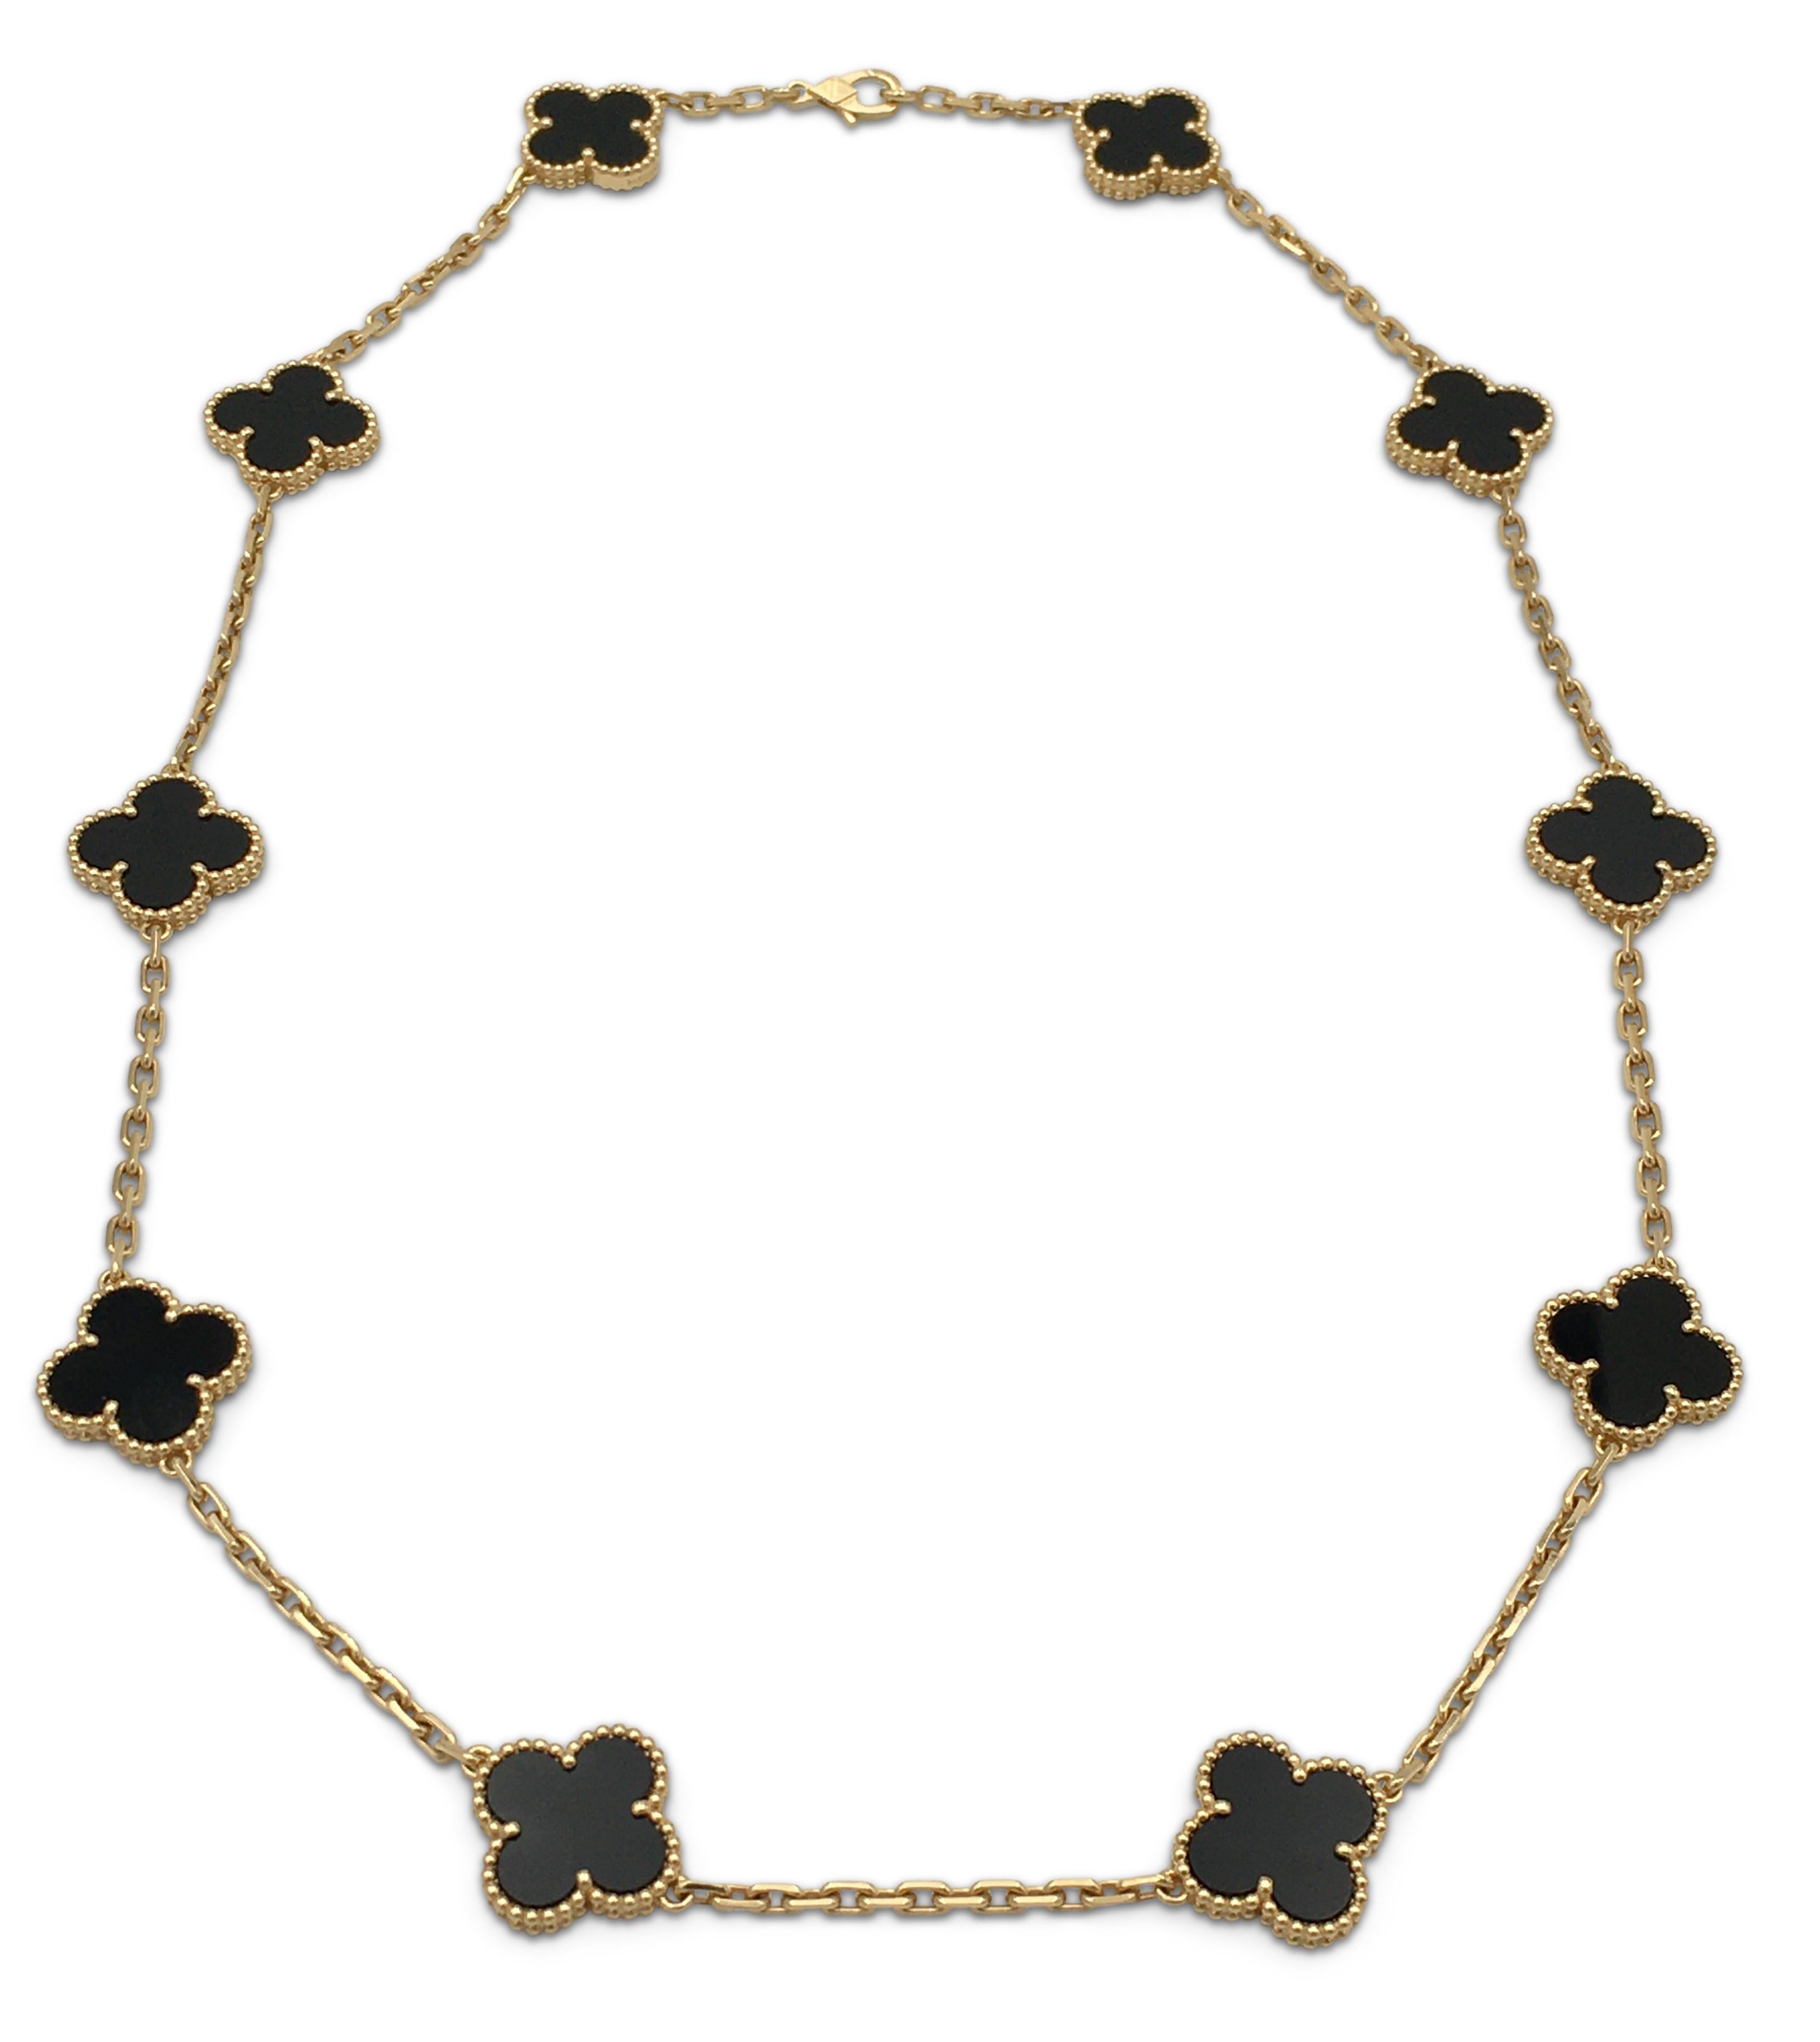 Authentic Van Cleef & Arpels 'Vintage Alhambra' necklace crafted in 18 karat yellow gold featuring 10 clover leaf inspired motifs of carved onyx. Signed VCA, Au750, with serial number and hallmarks. Necklace is not presented with original box or